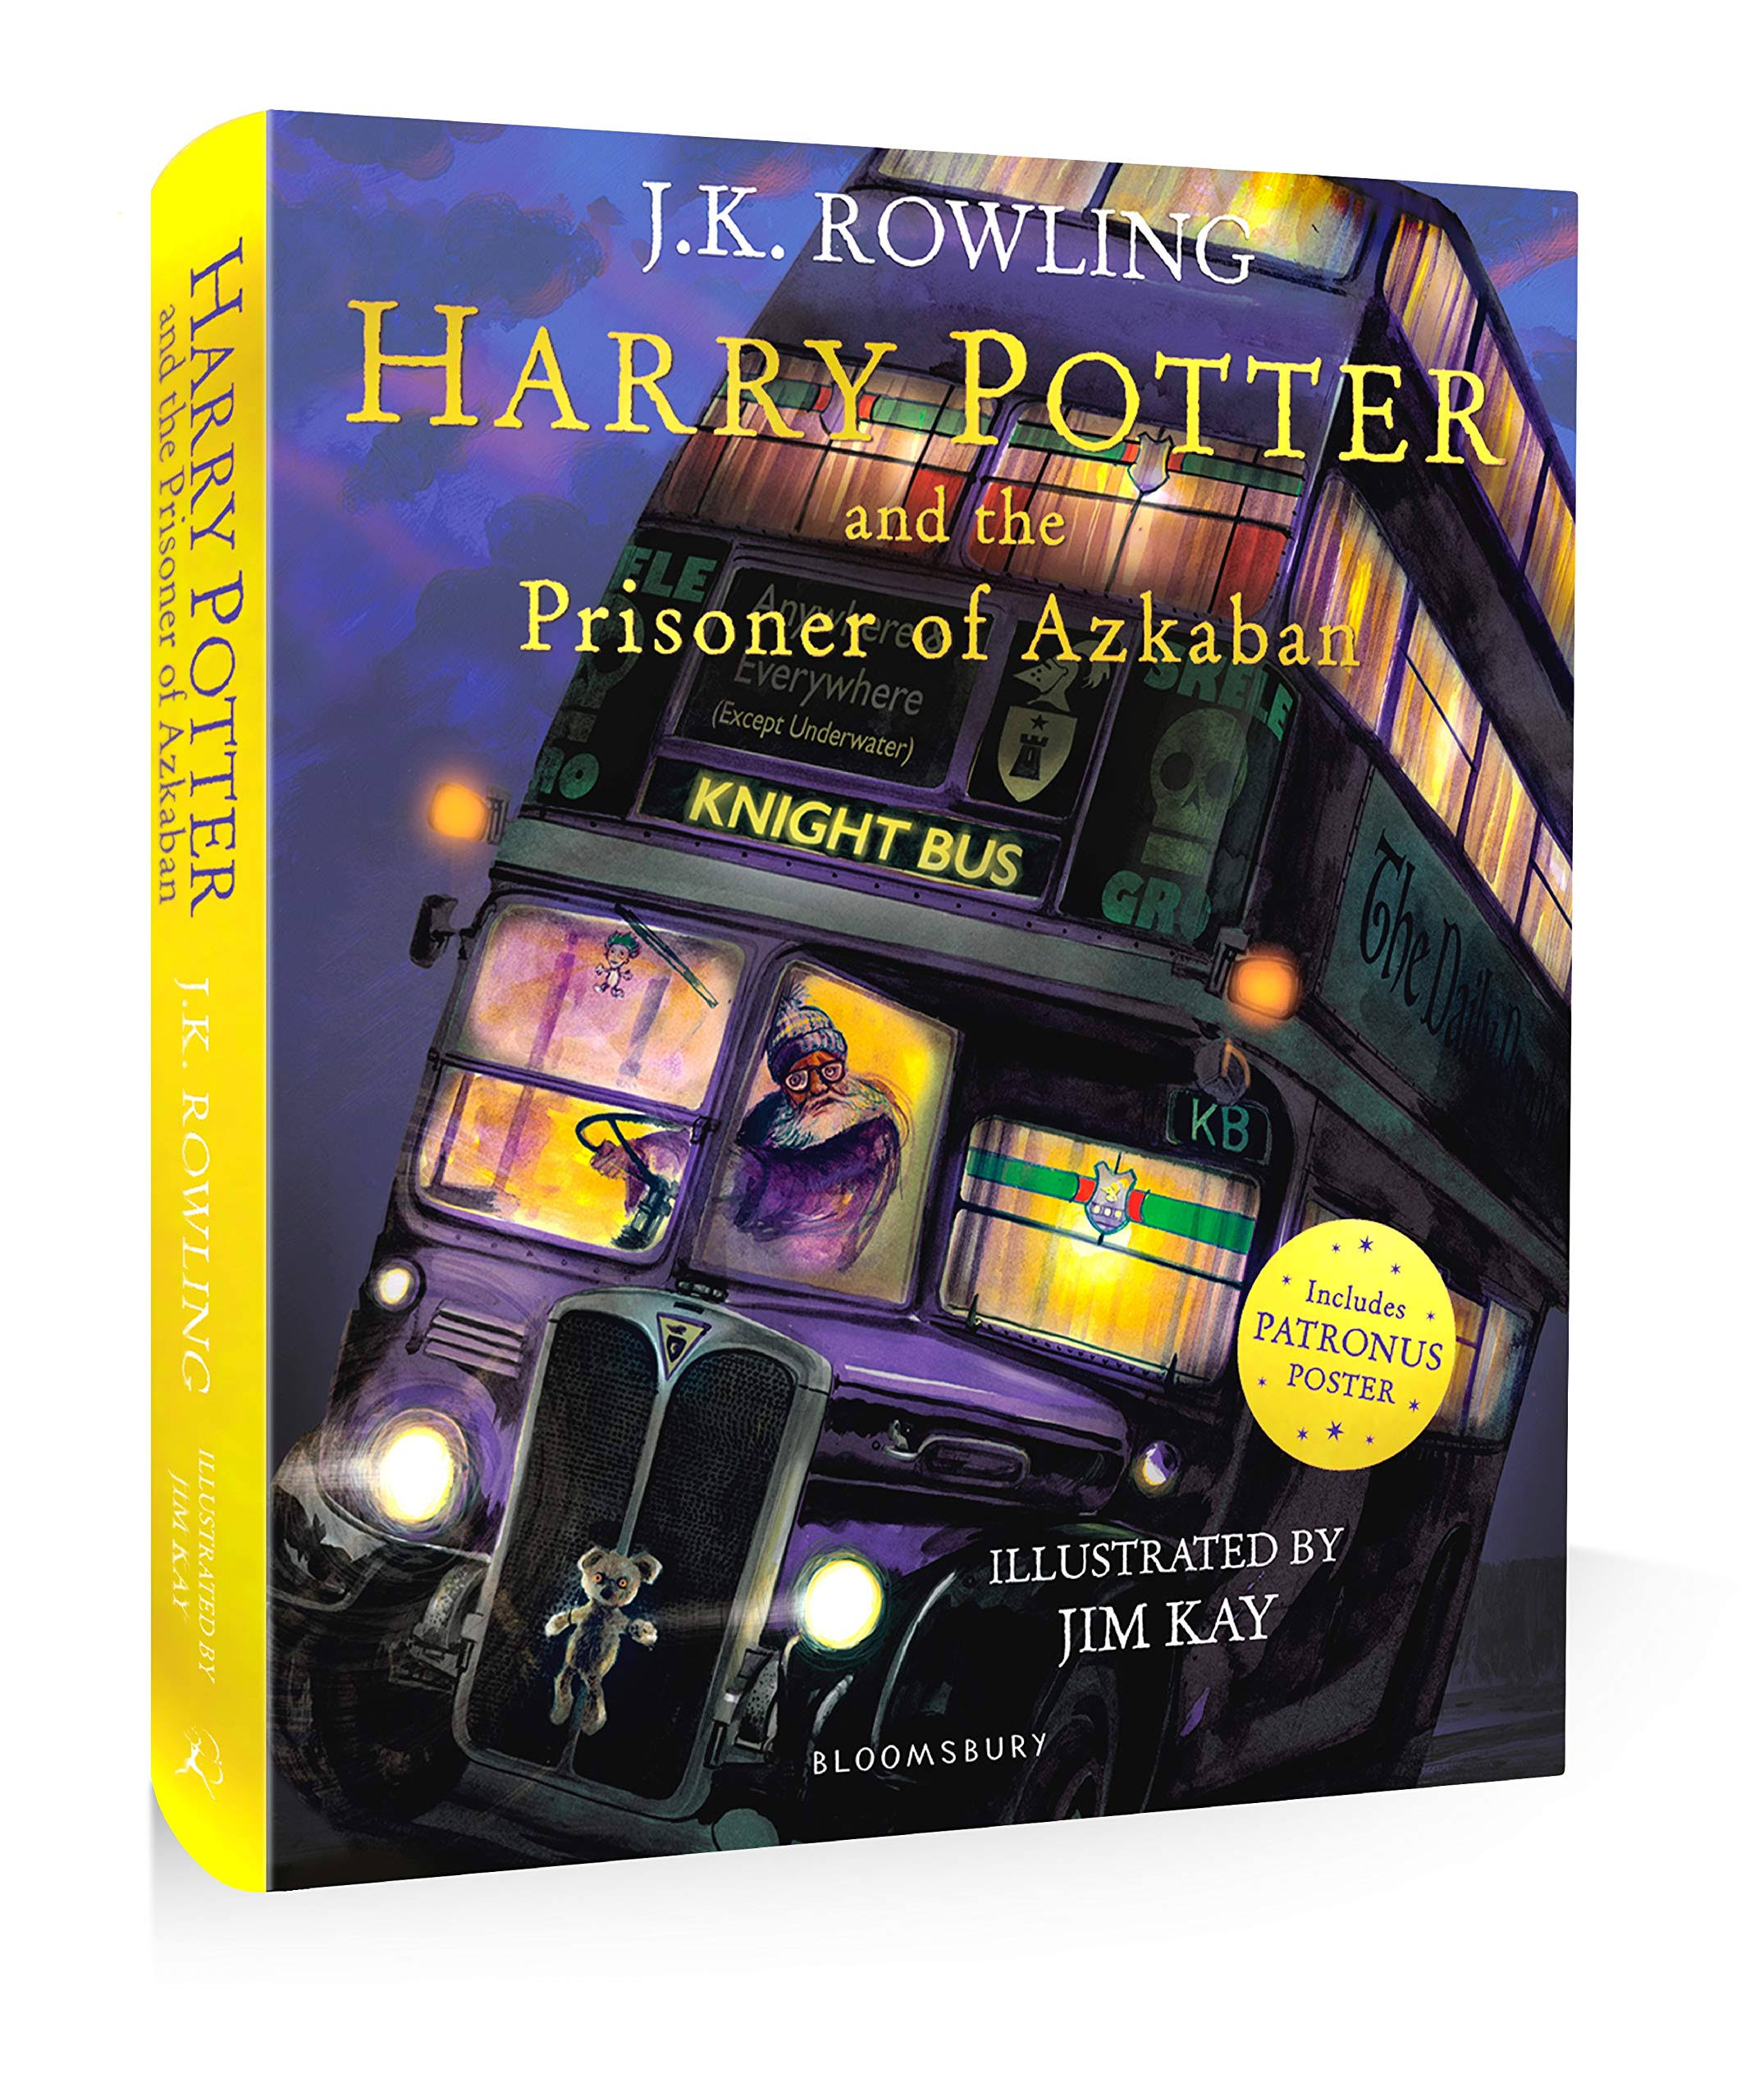 Harry Potter and The Prisoner of Azkaban by J. K. Rowling